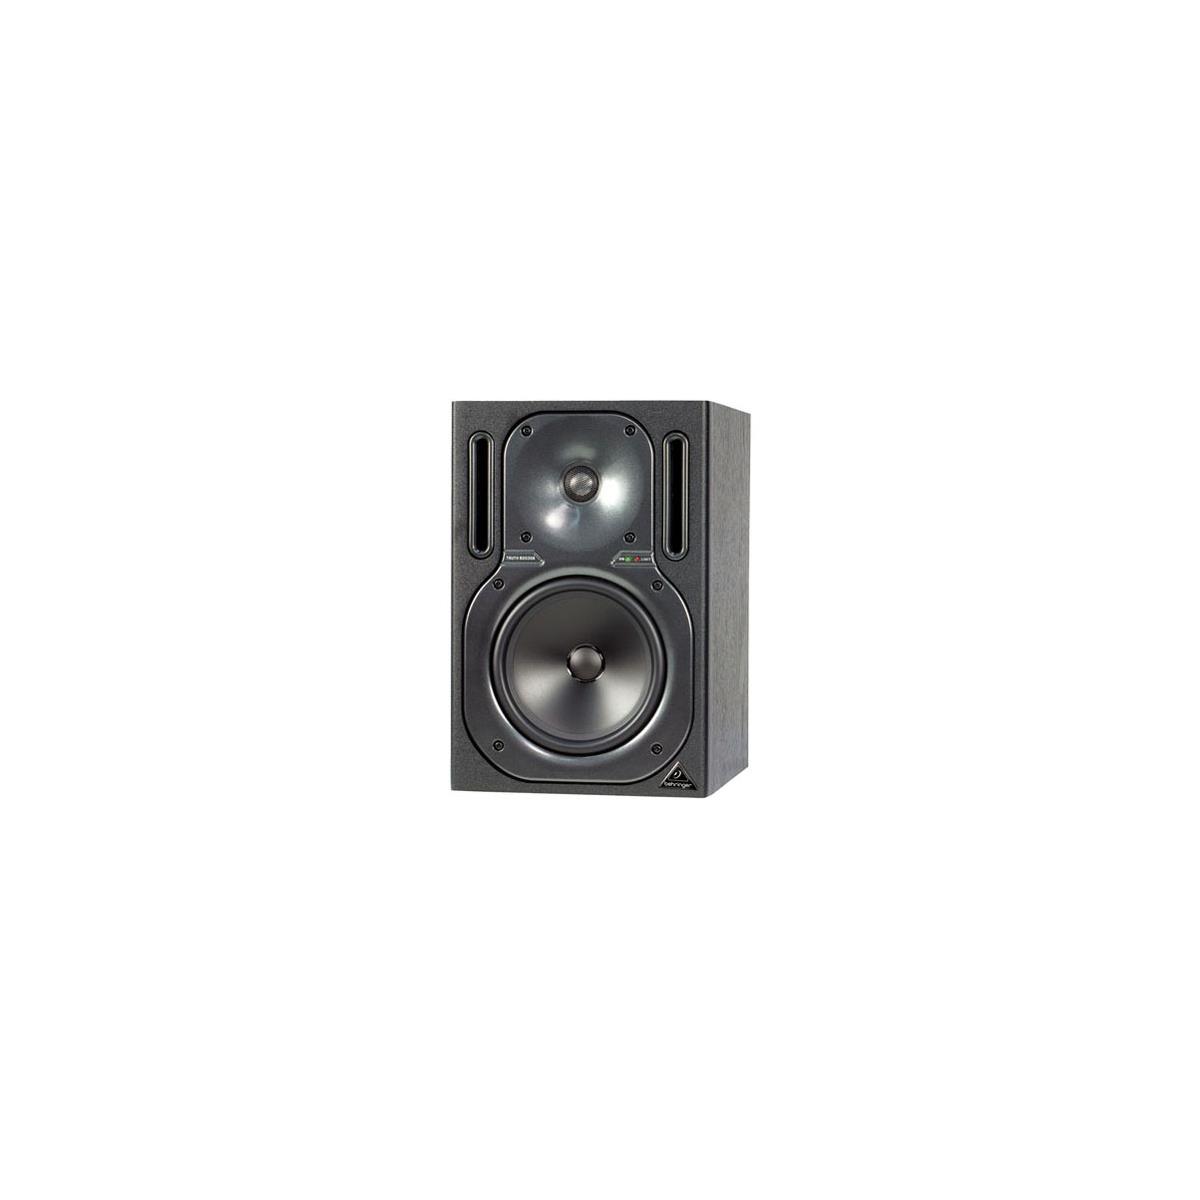 Image of Behringer TRUTH B2030A High-Resolution Active 2-Way Studio Monitor